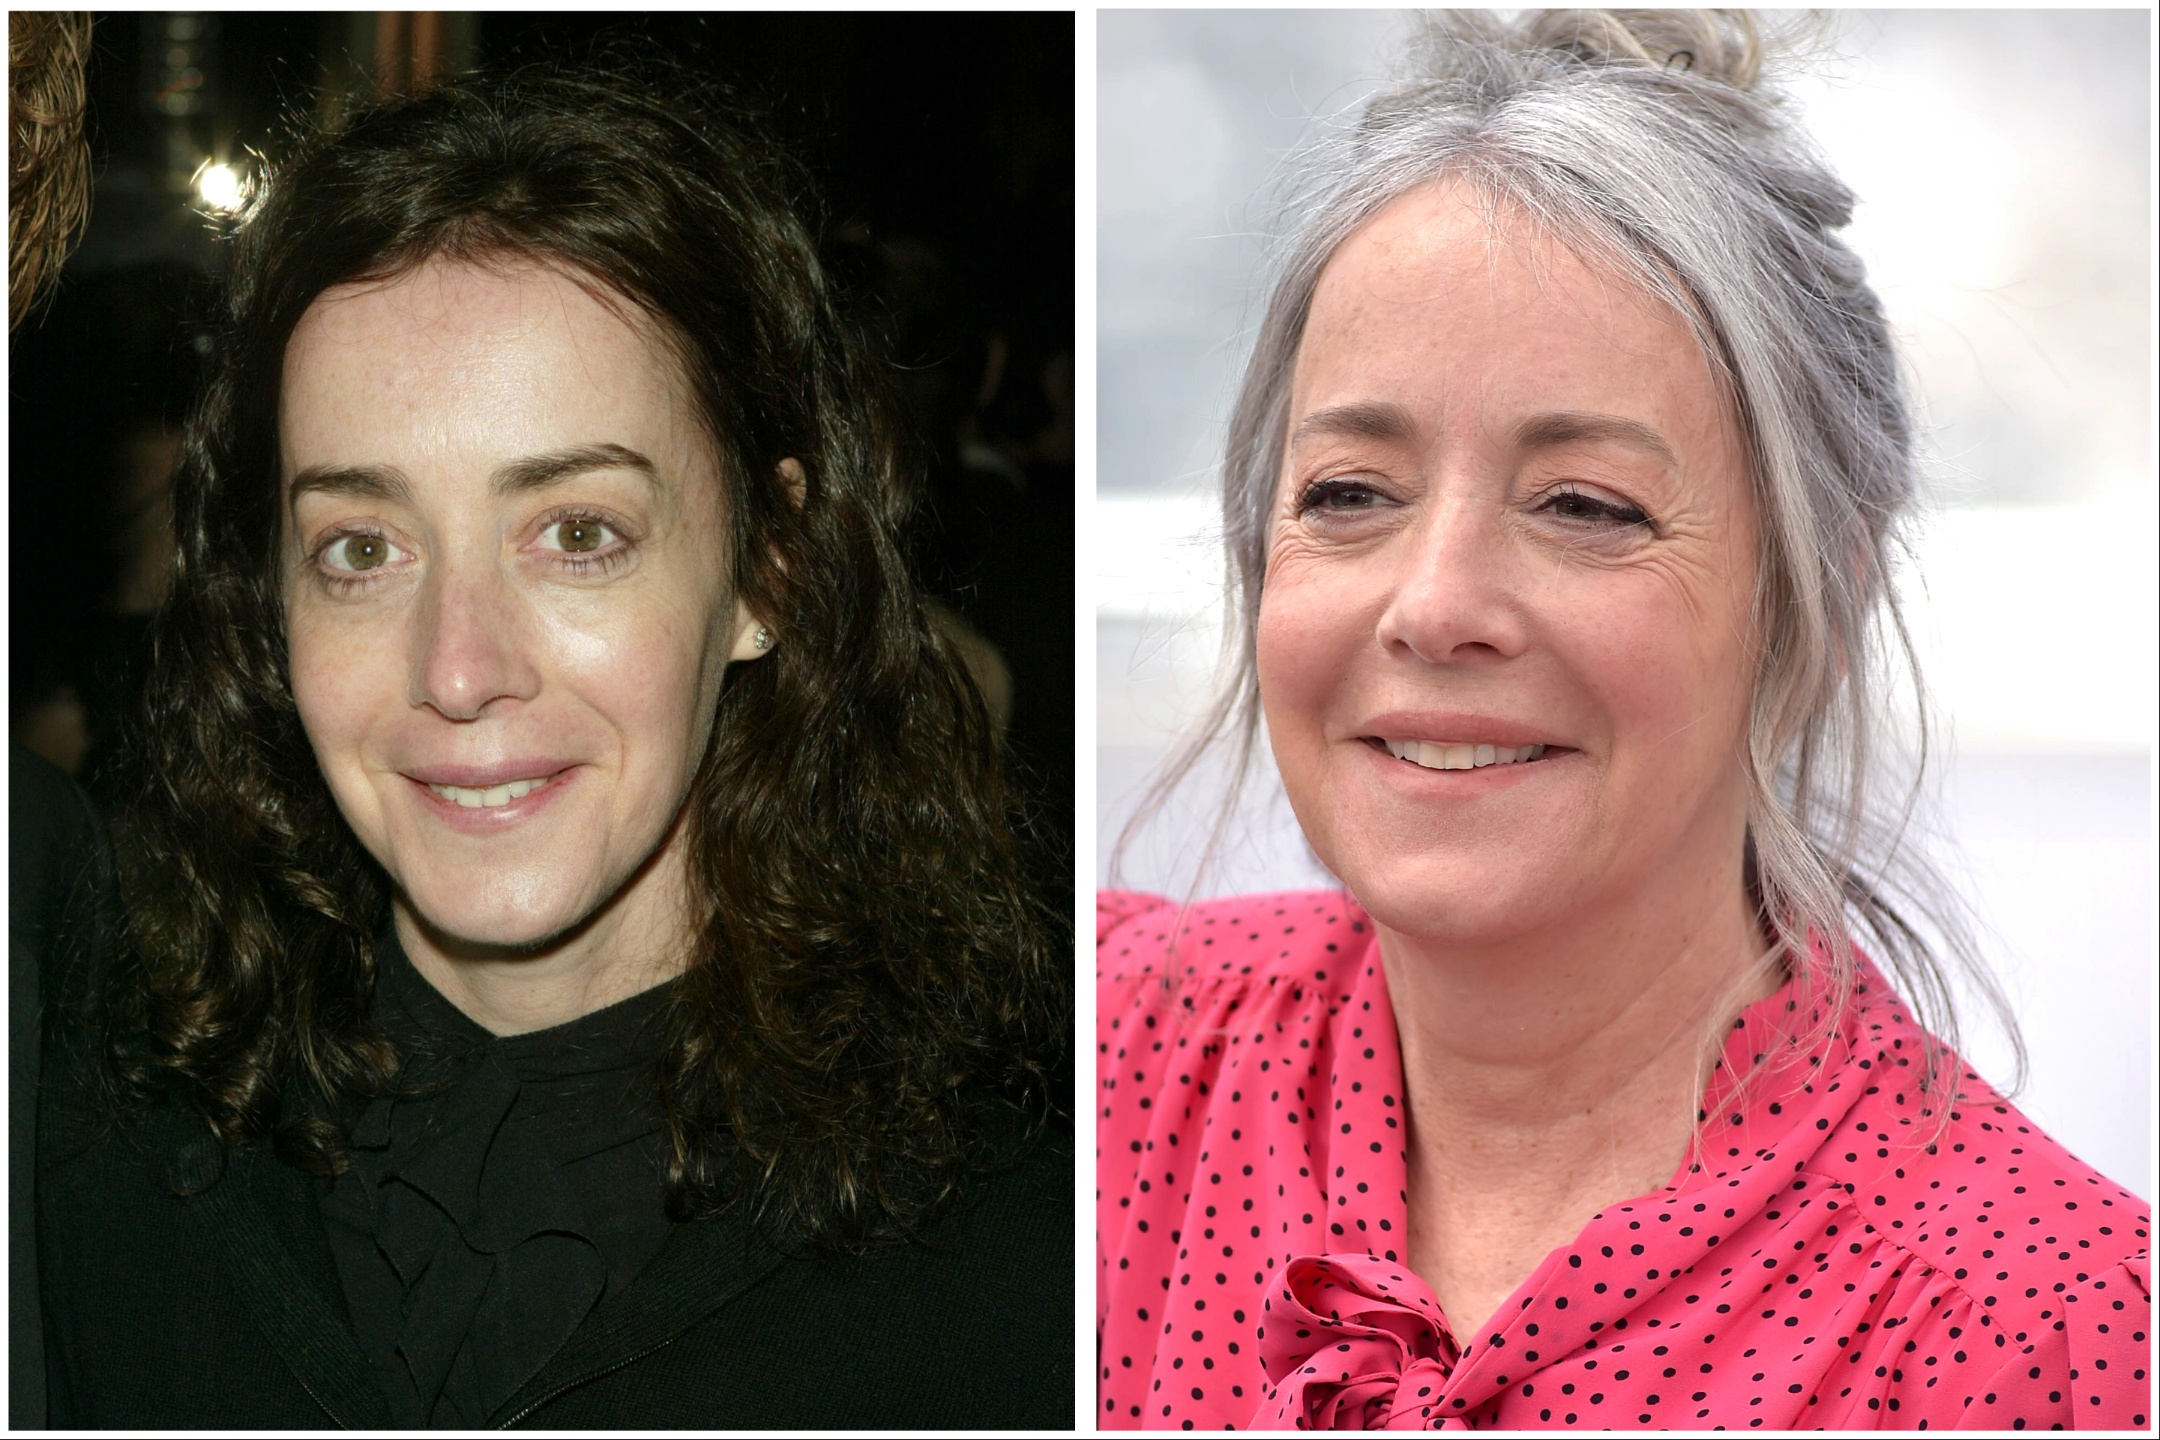 'Eternal Sunshine of the Spotless Mind' cast member Jane Adams in 2004 and 2023